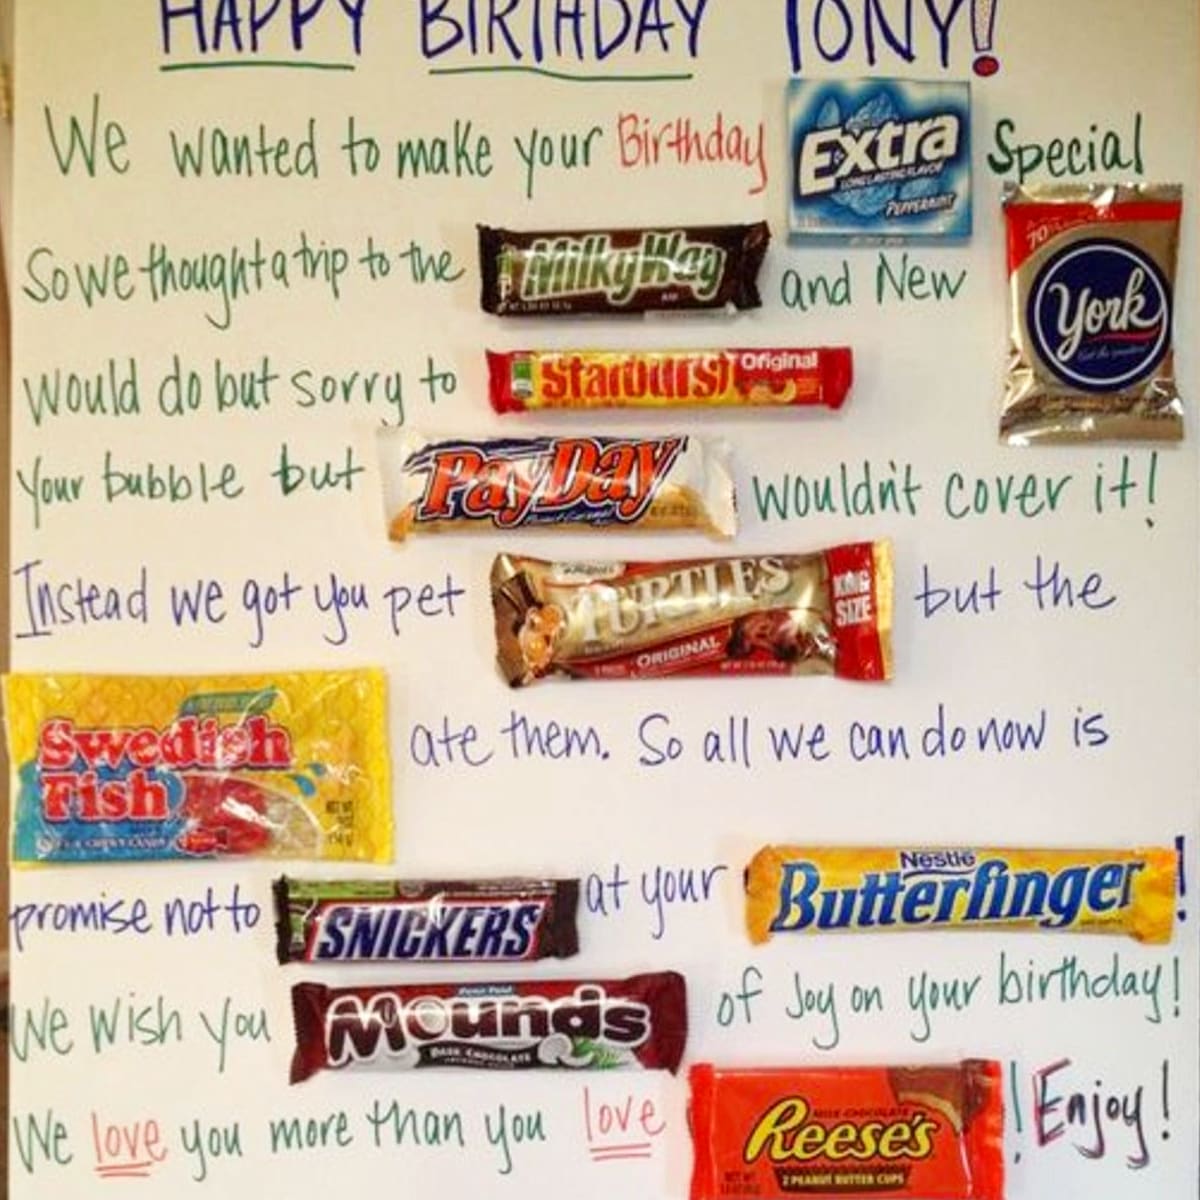 Easy DIY gift ideas - LOVE these birthday candy poster ideas to make for his (or her) birthday party!  This is a great candy poster card to give from a group!